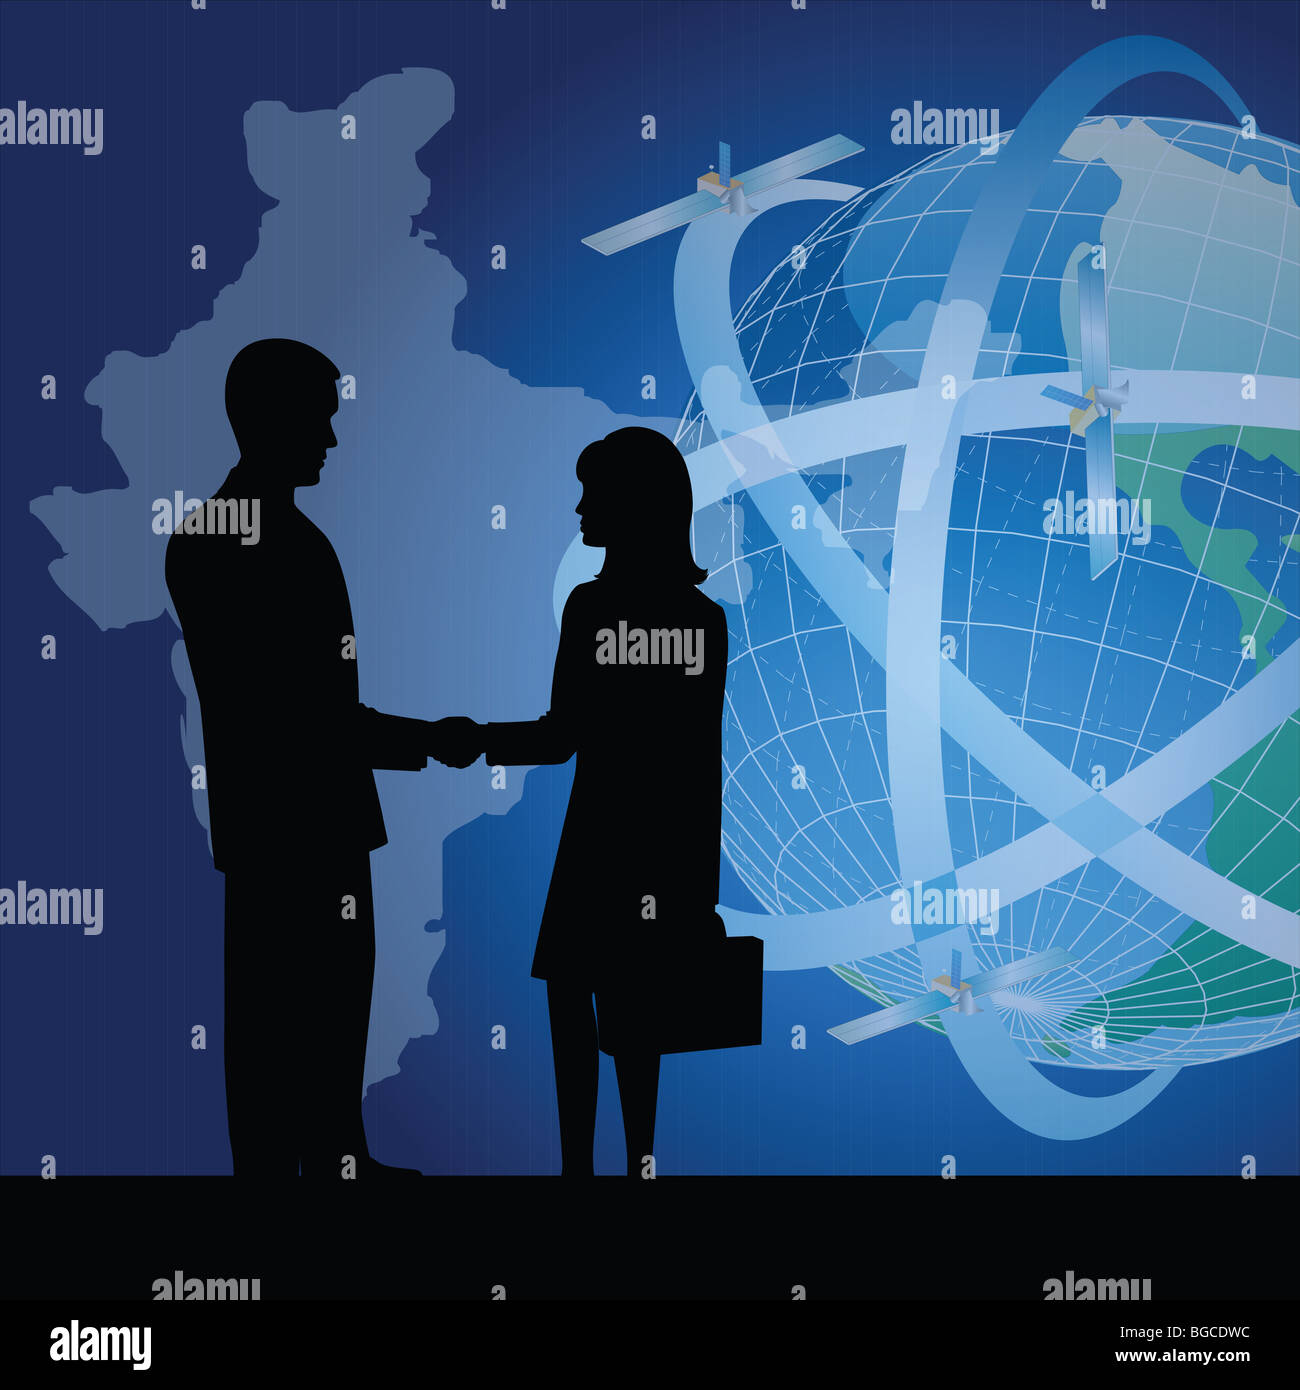 silhouette of business people showing business agreement Stock Photo